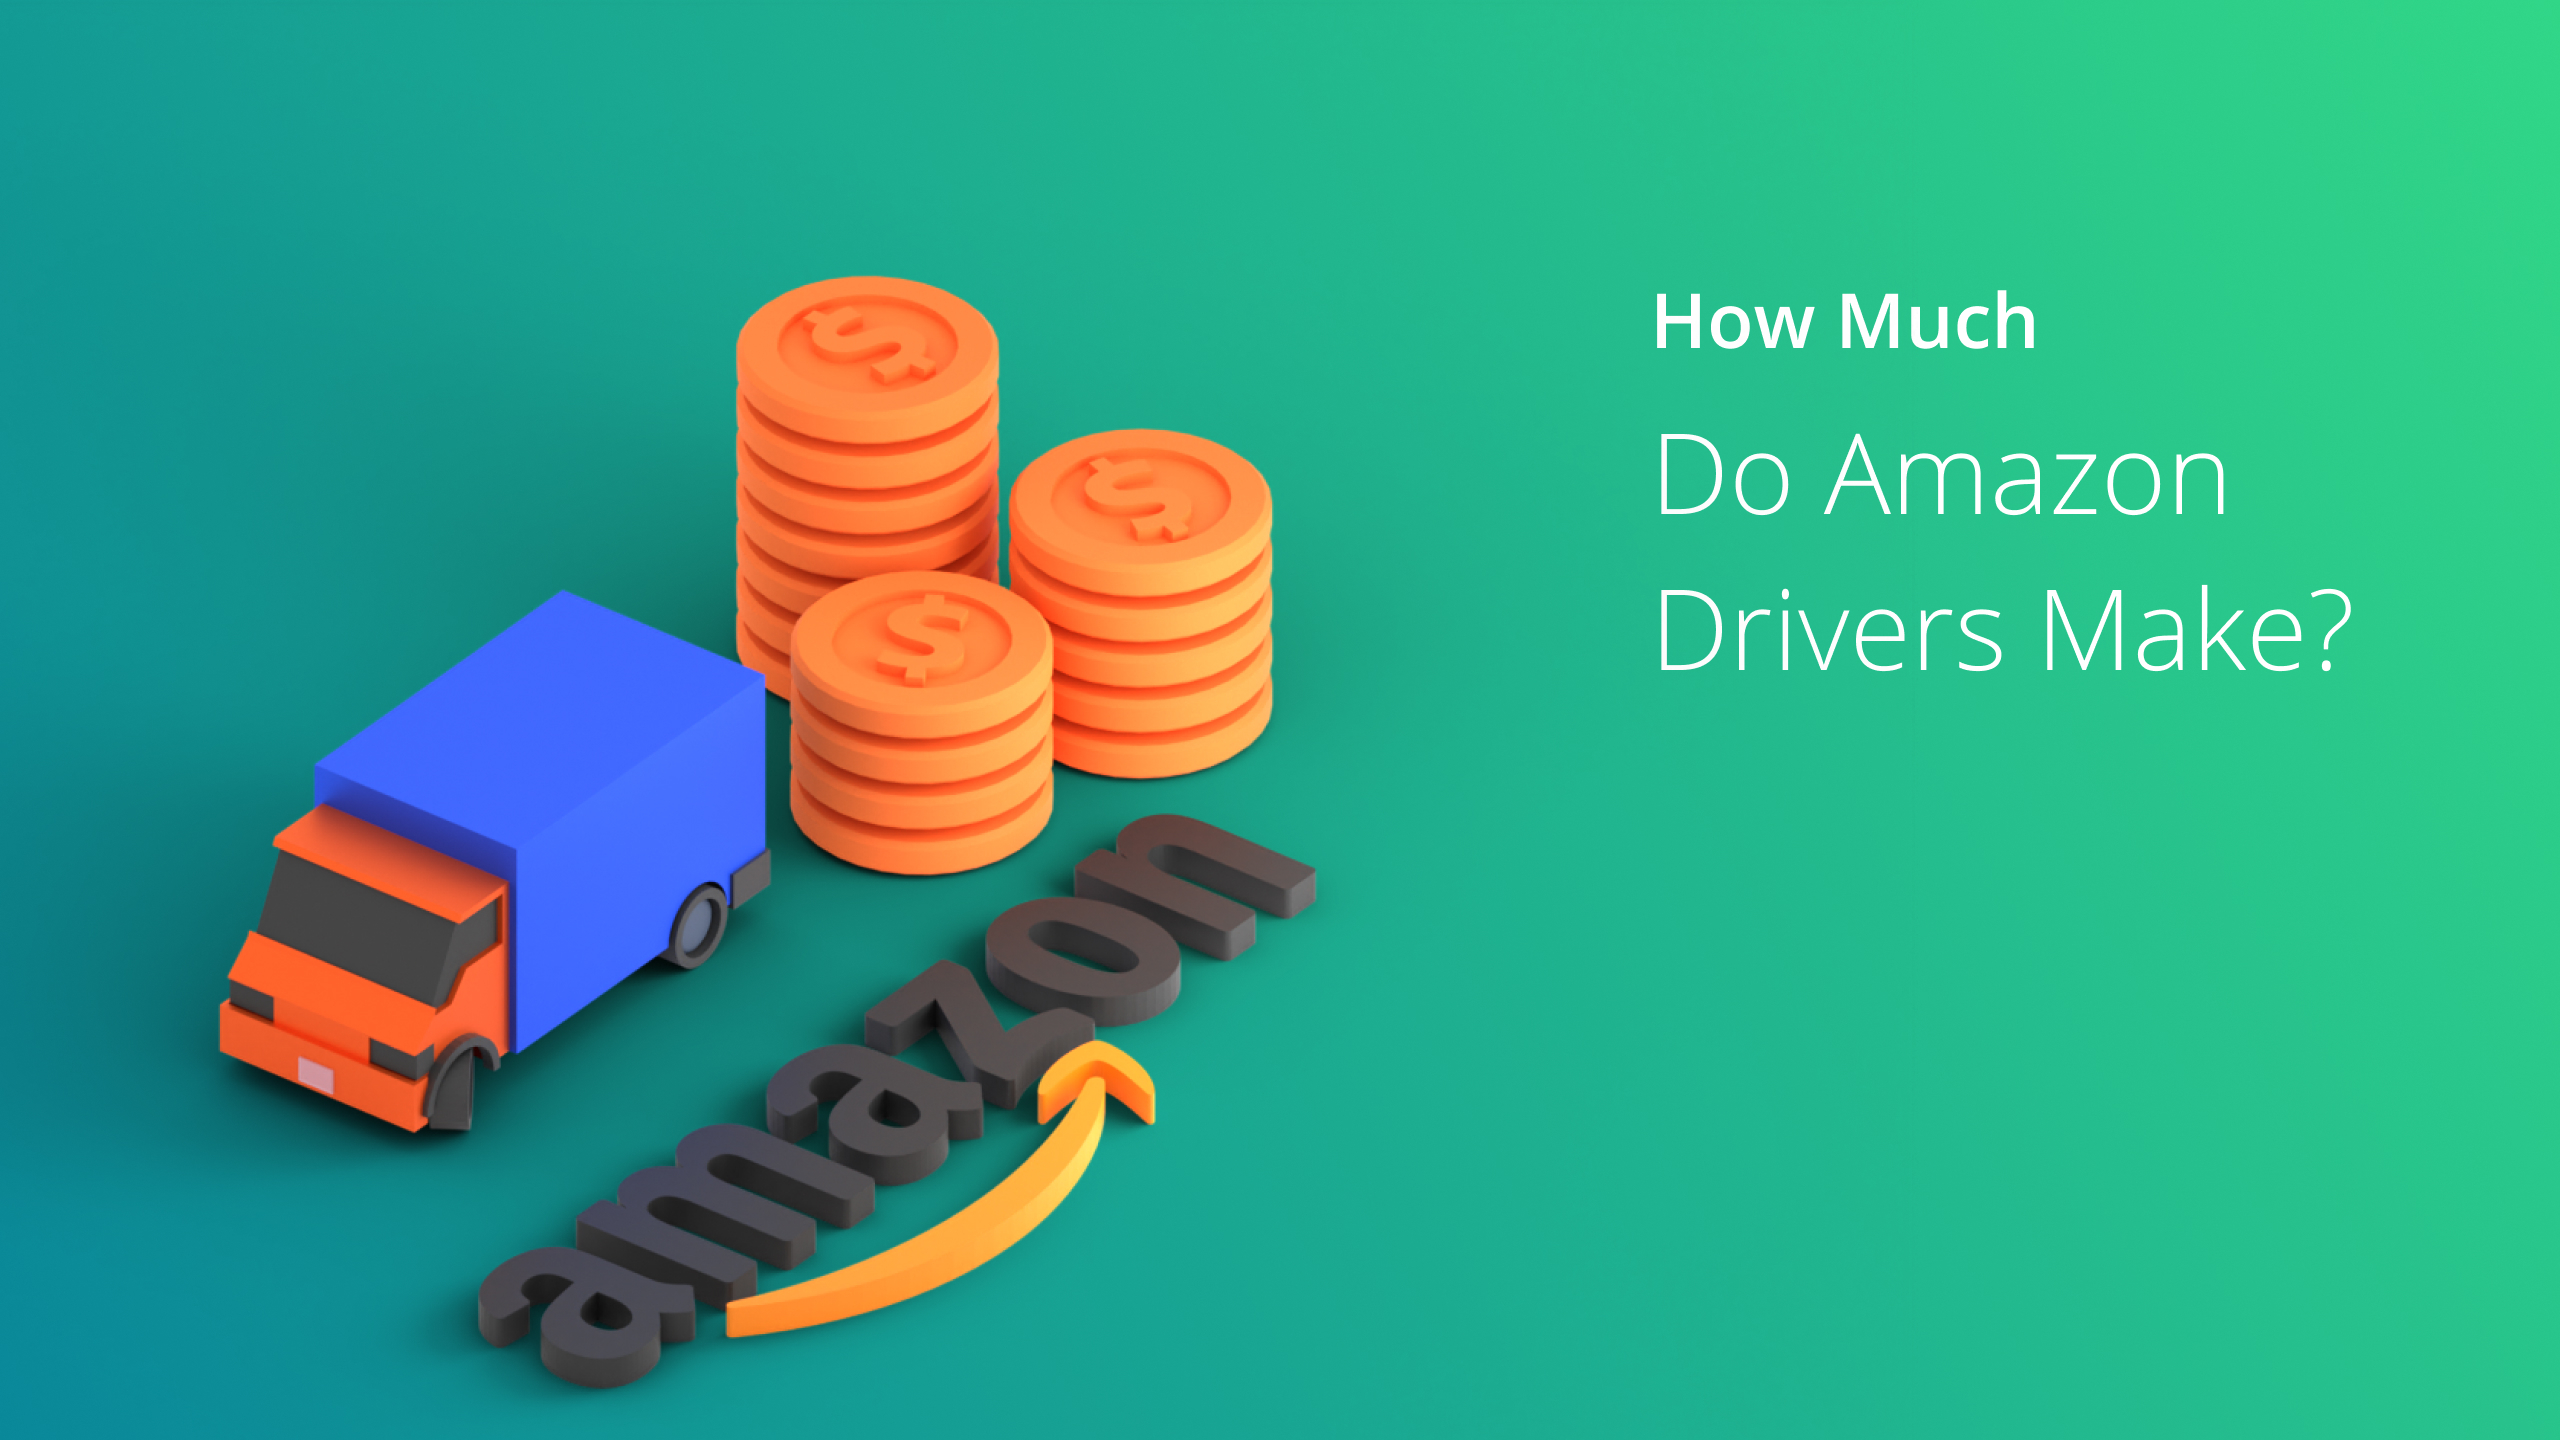 How Much Do Amazon Drivers Make?